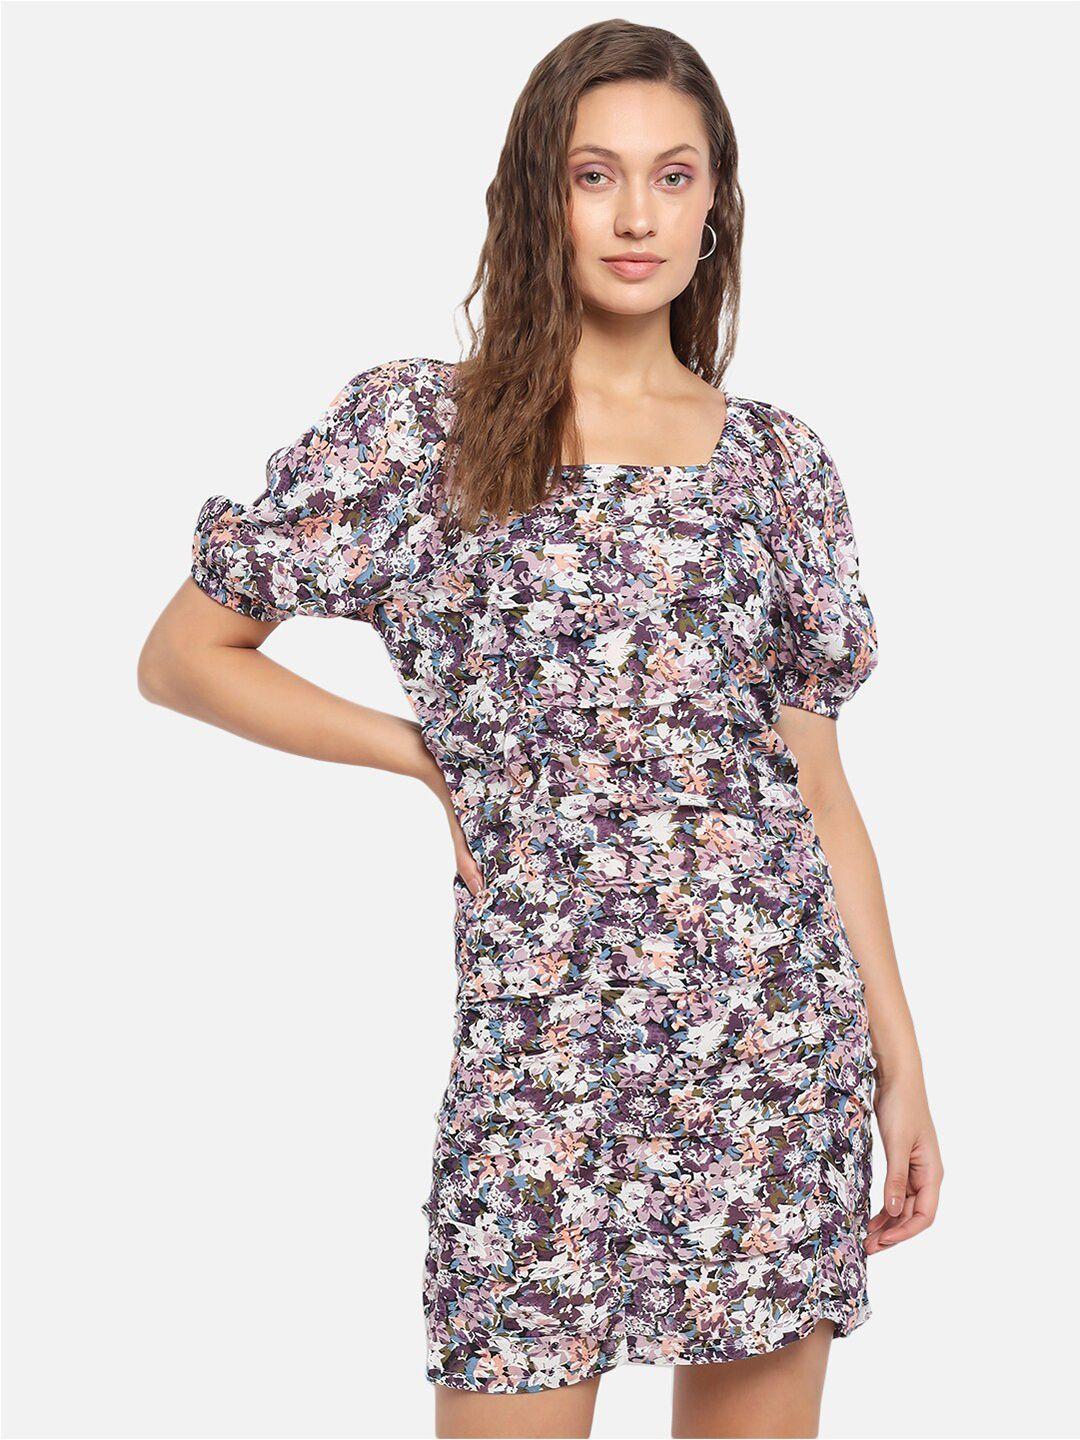 trend-arrest-purple-&-white-floral-printed-ruched-sheath-dress